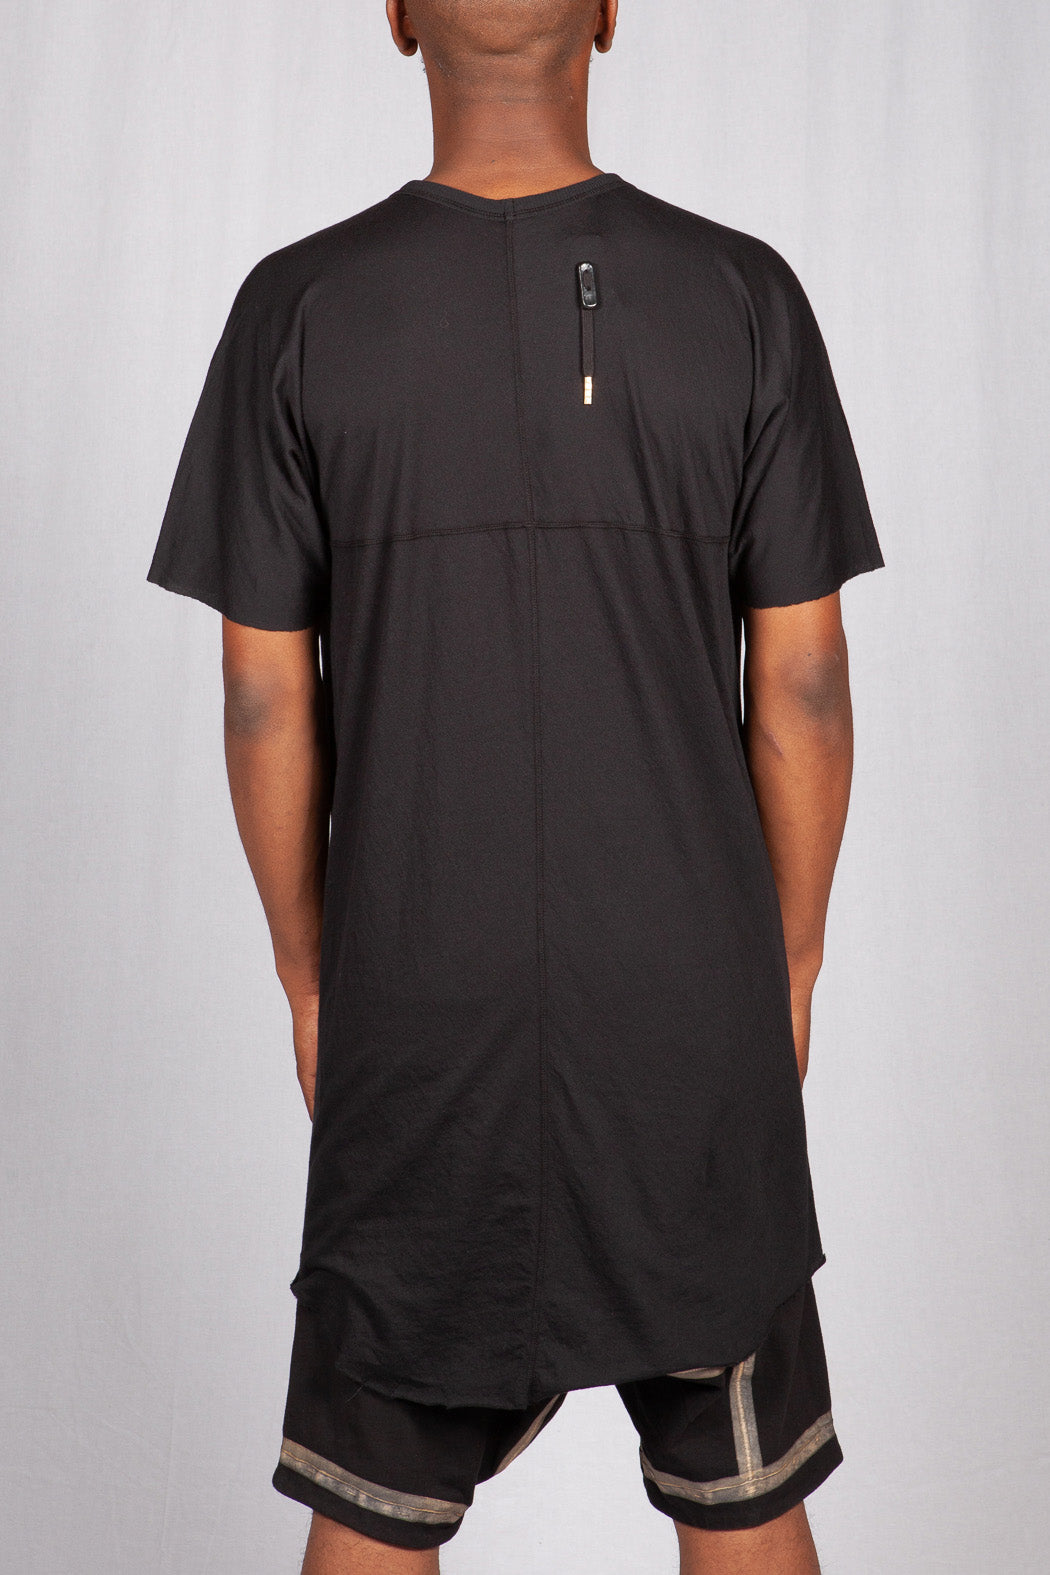 Black Object Dyed Long One Piece Regular Fit T-Shirt